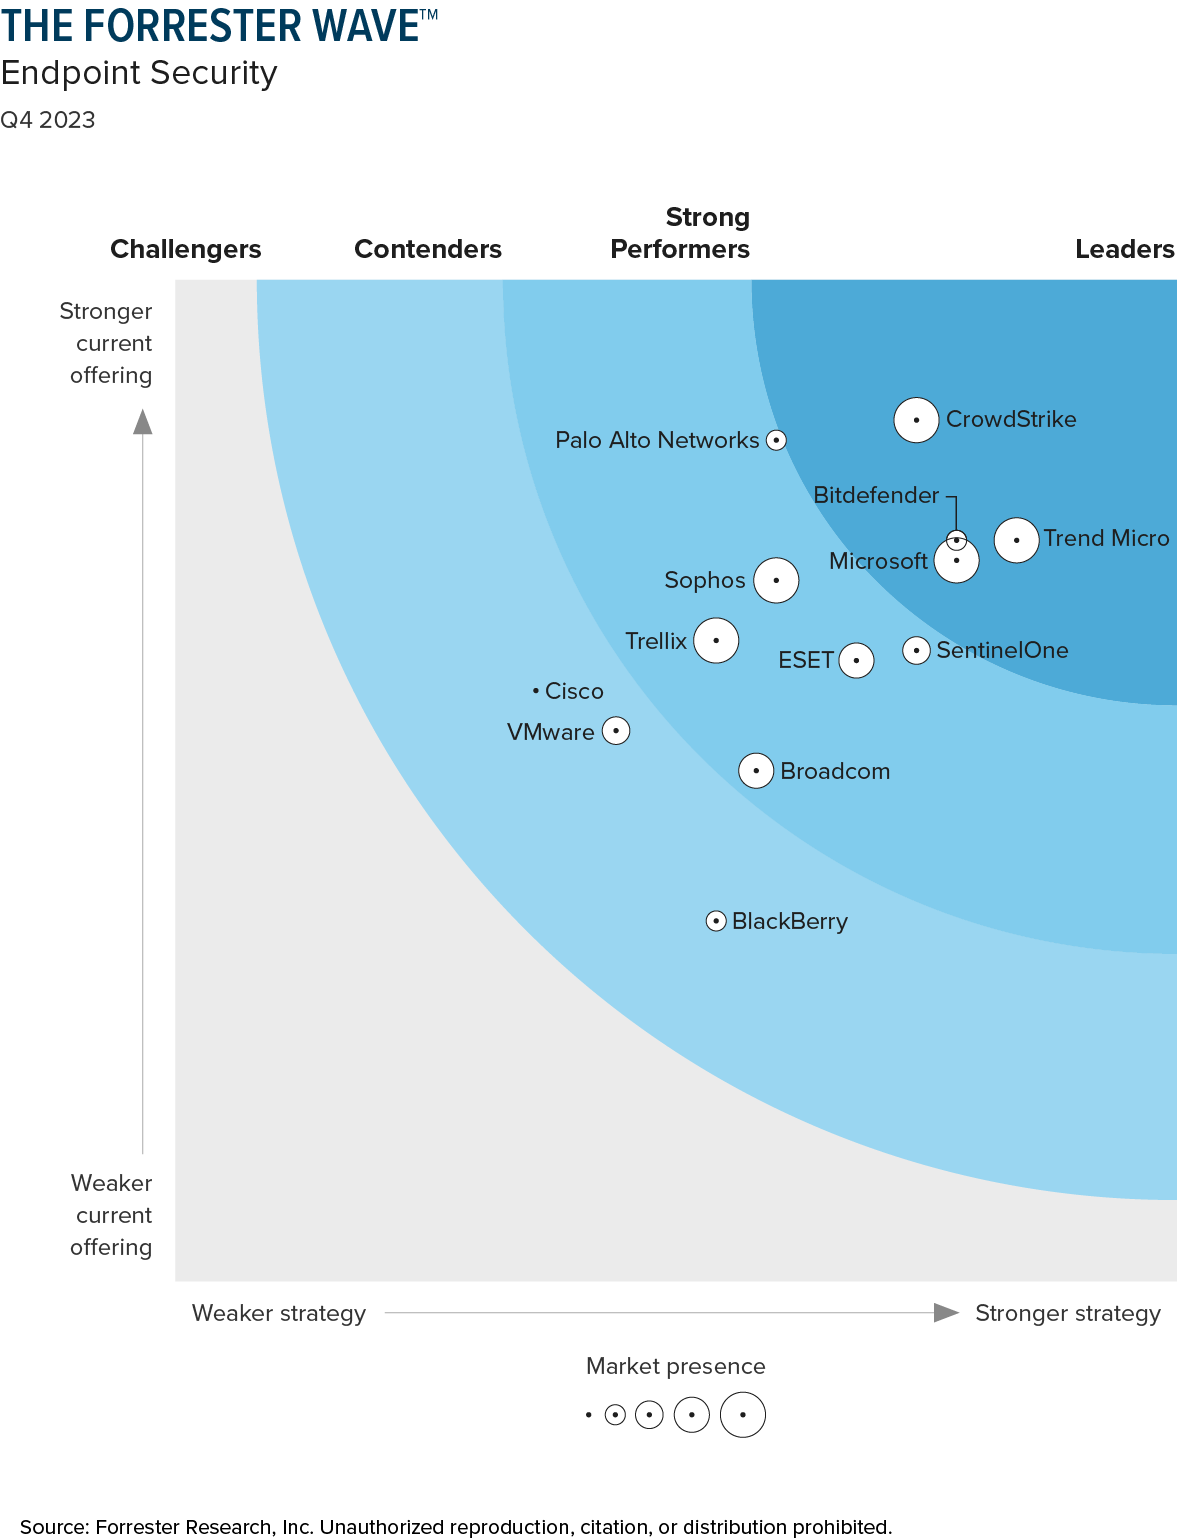 "The Forrester Wave: Endpoint Security, Q4 2023"